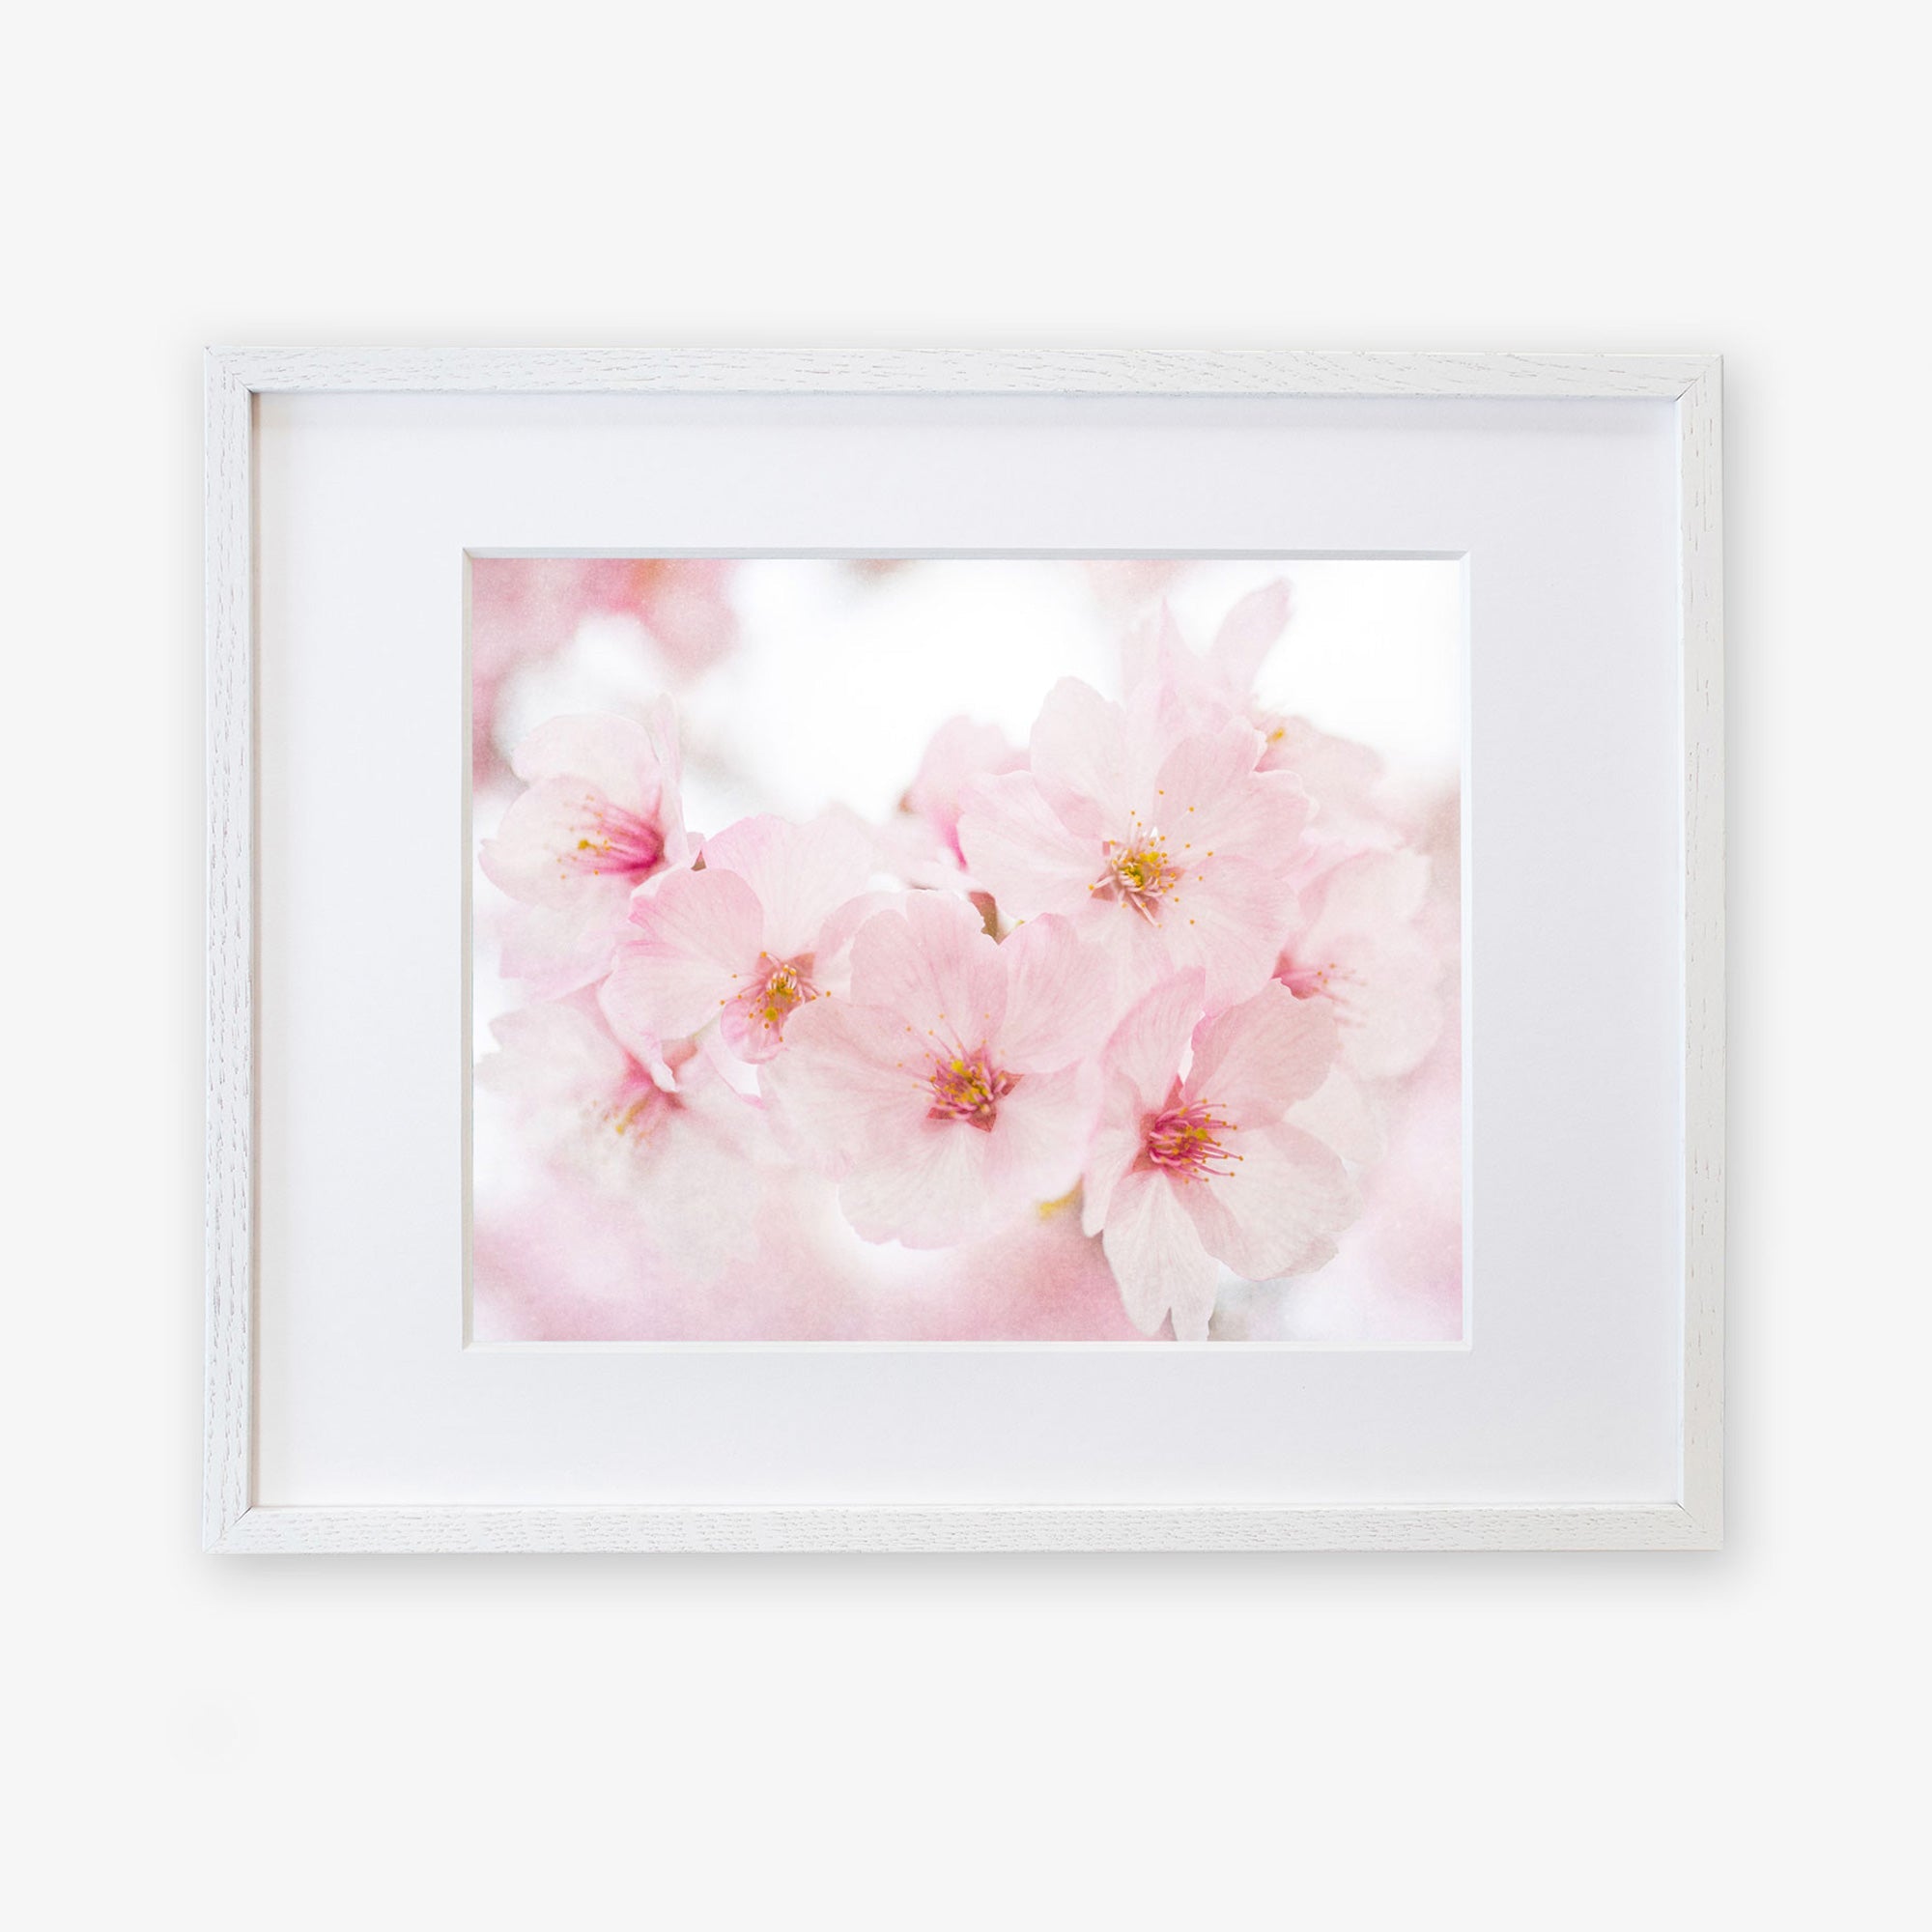 Offley Green&#39;s Pink Flower Print, &#39;Cherry Blossom&#39;, displayed in a simple white frame against a white wall, printed on archival photographic paper.